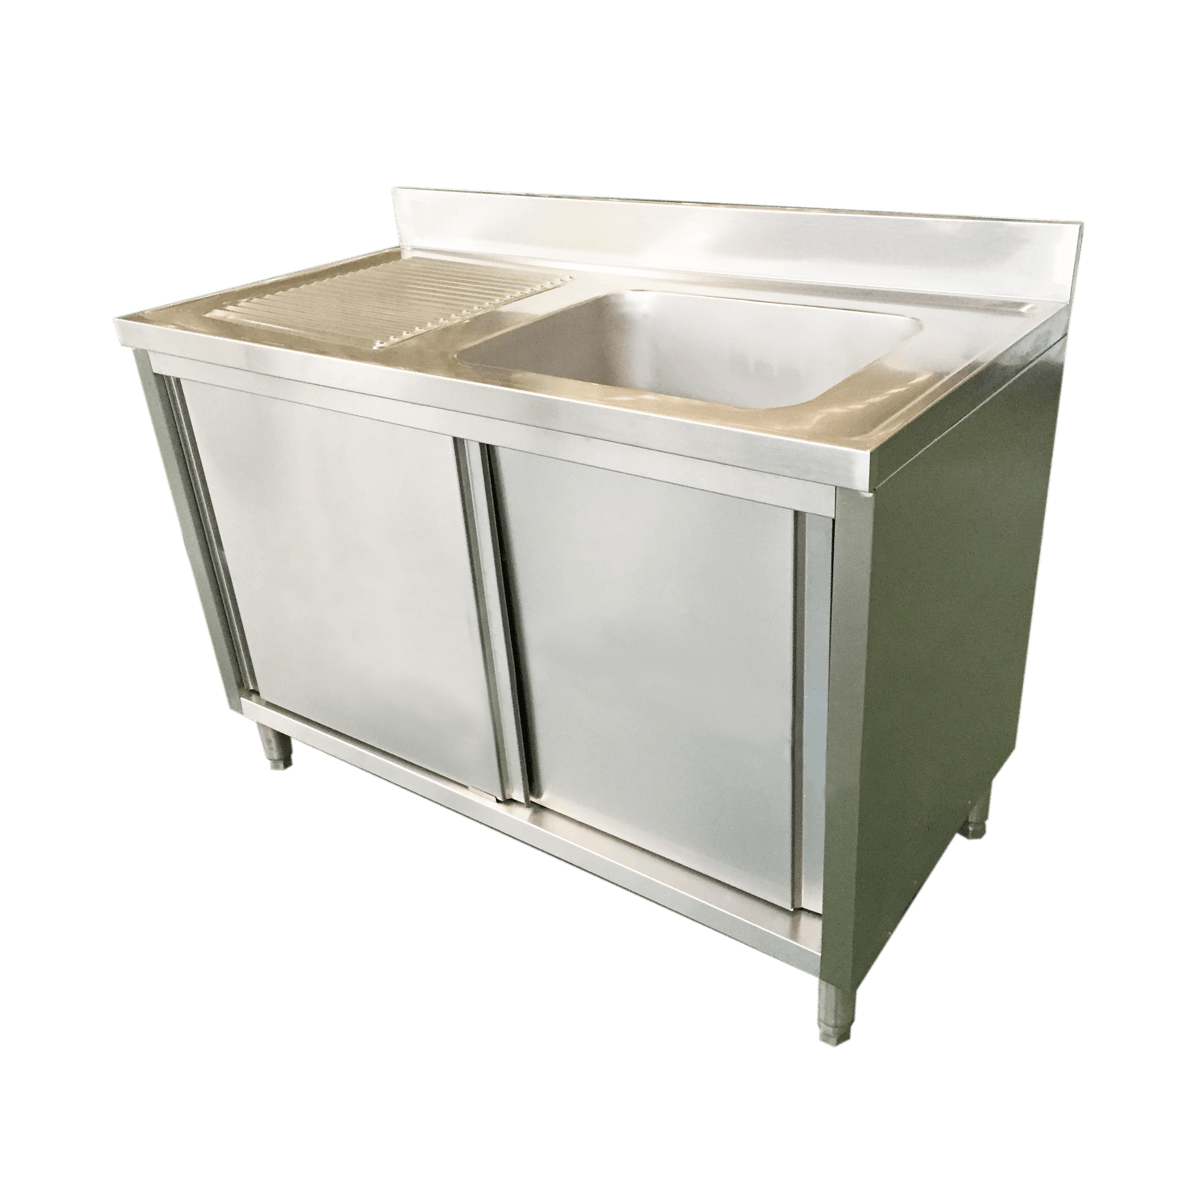 Creatice Double Sink Cabinet Size Kitchen for Small Space